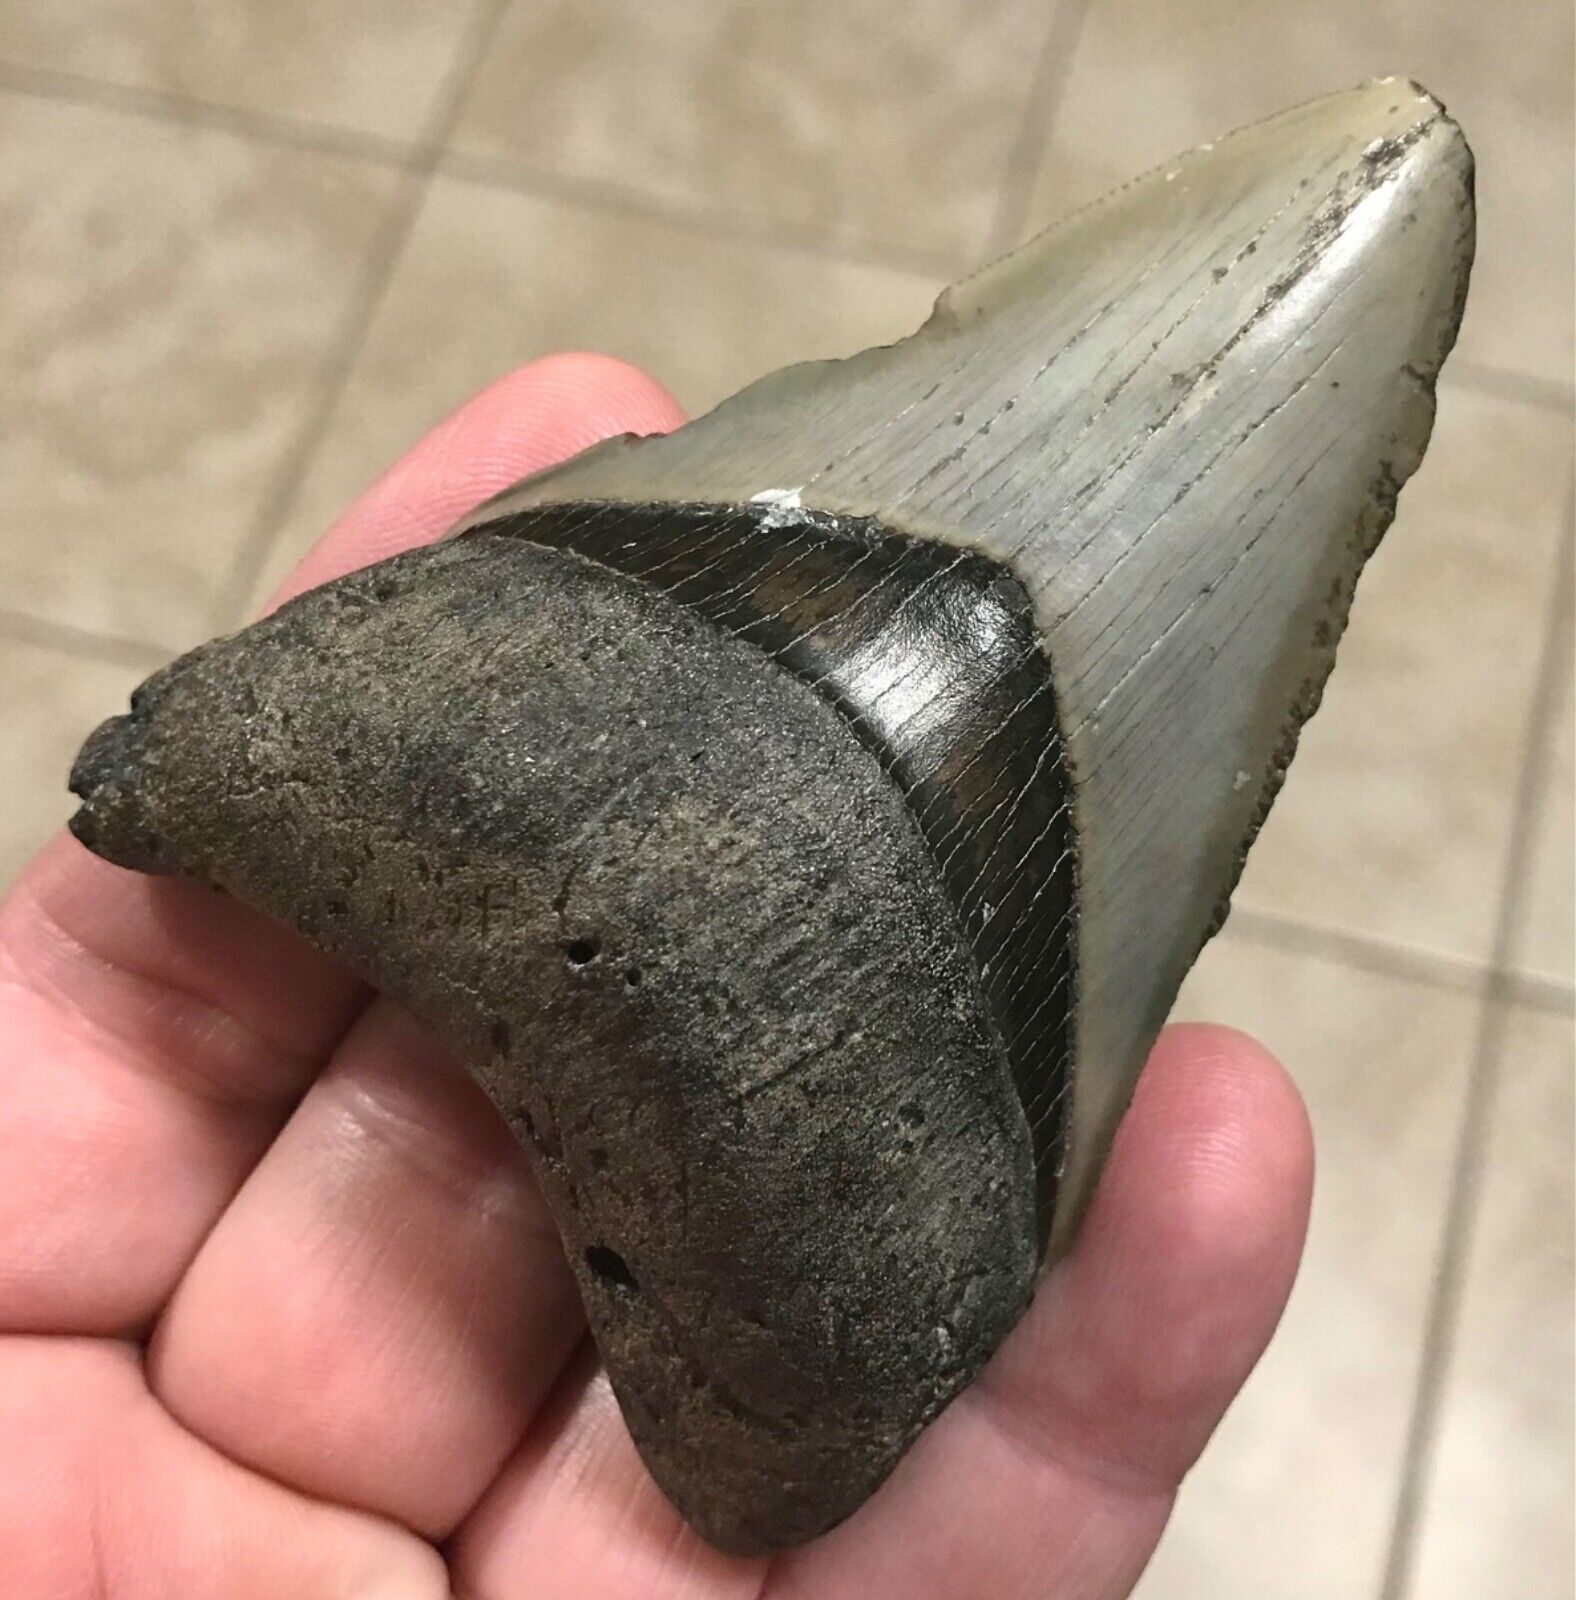 BOLD,BITTEN & SCARRED LOWER-B.VALLEY- 3.82” x 2.58” Megalodon Shark Tooth Fossil